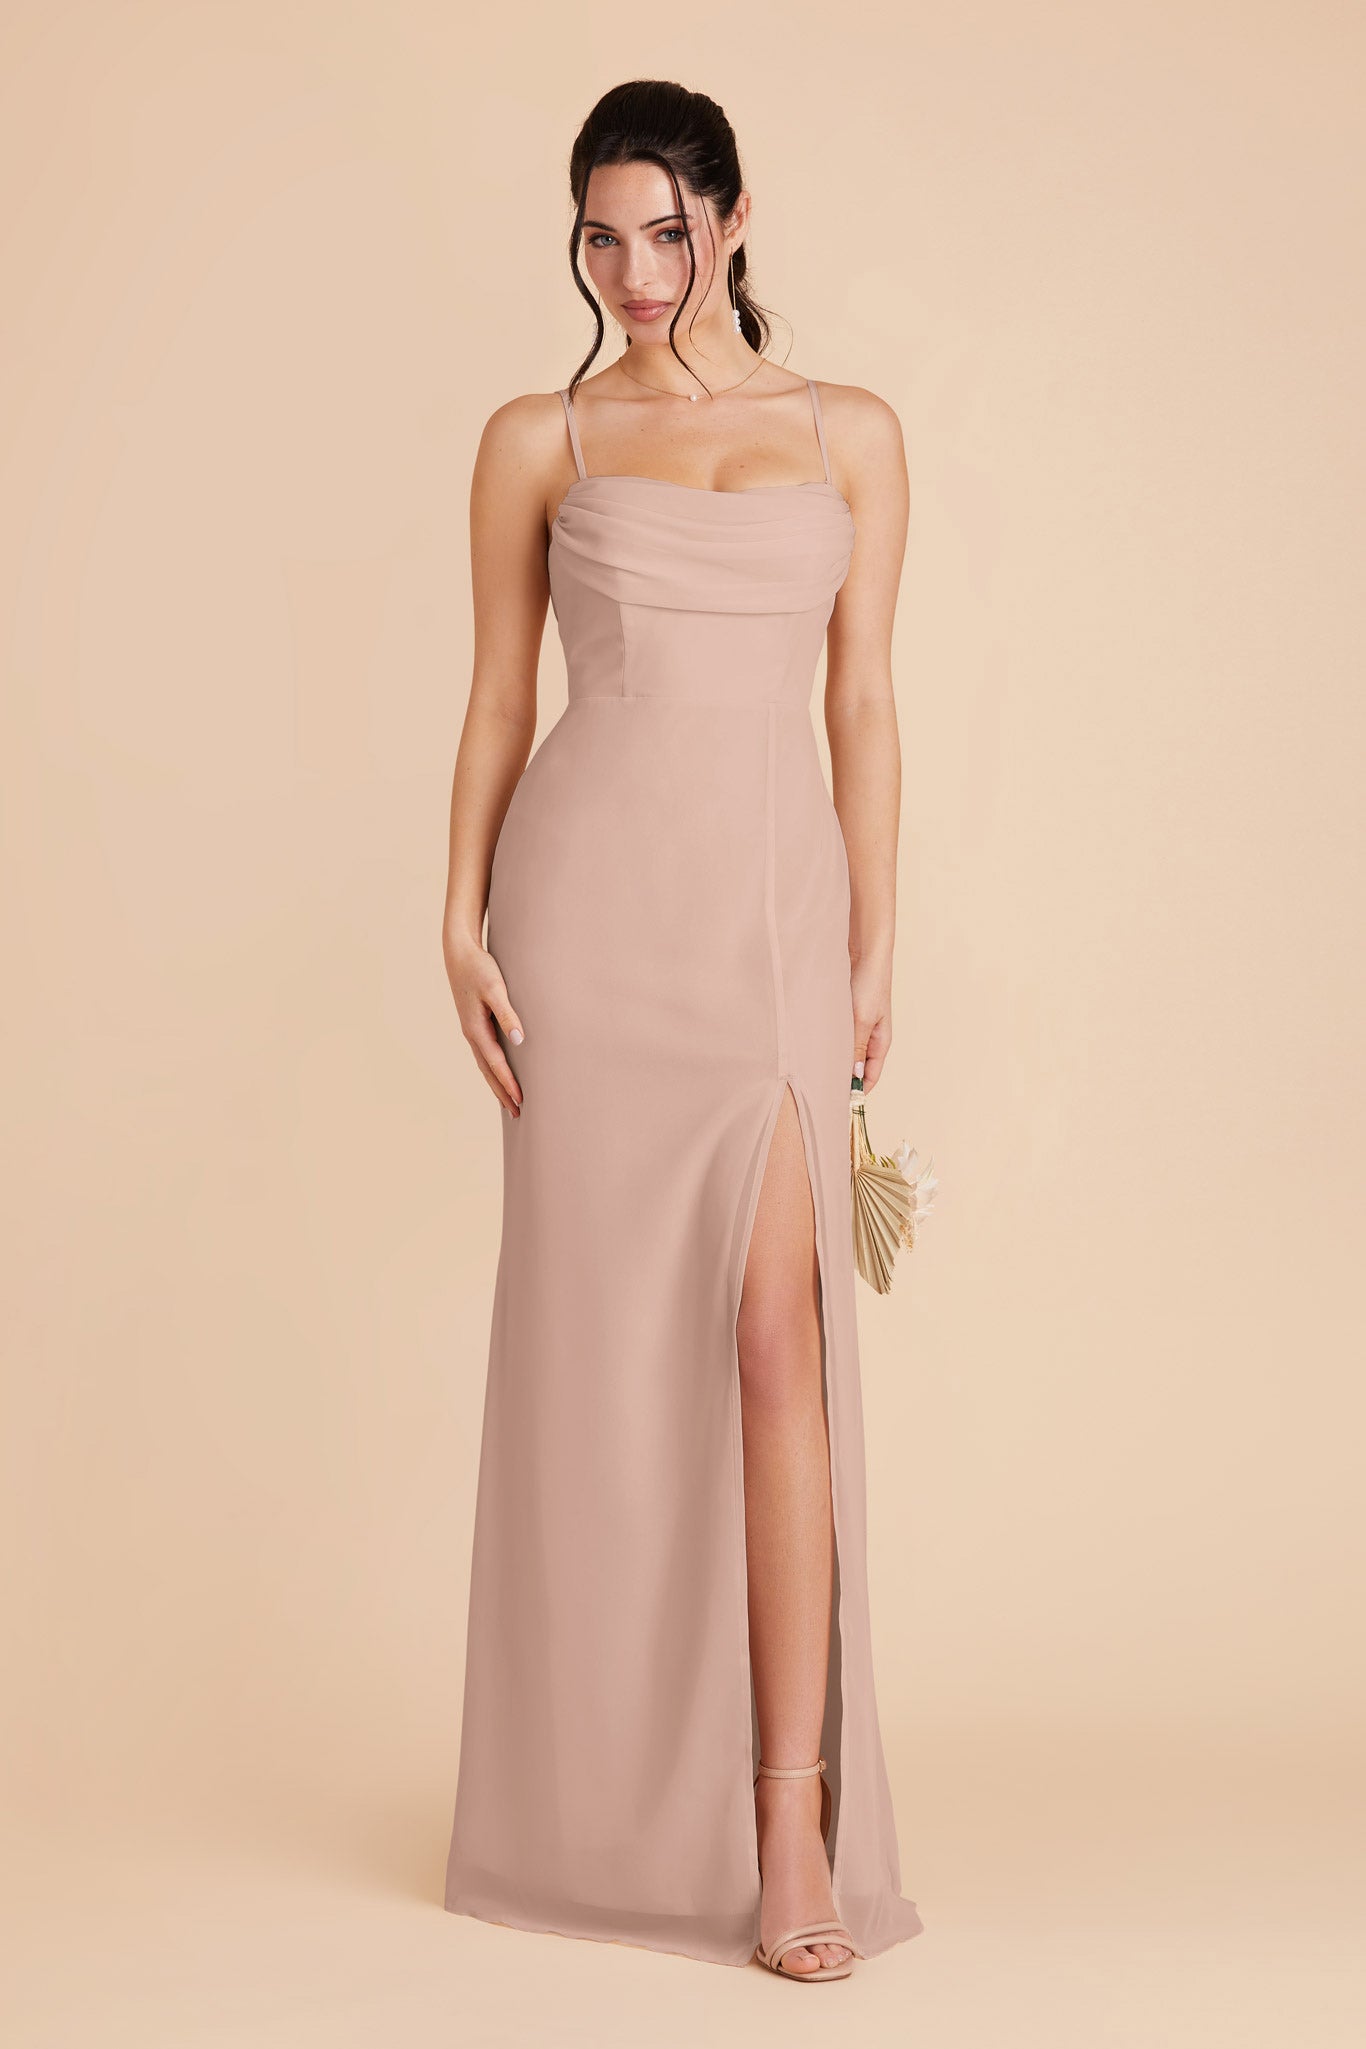 Taupe Mira Convertible Dress by Birdy Grey